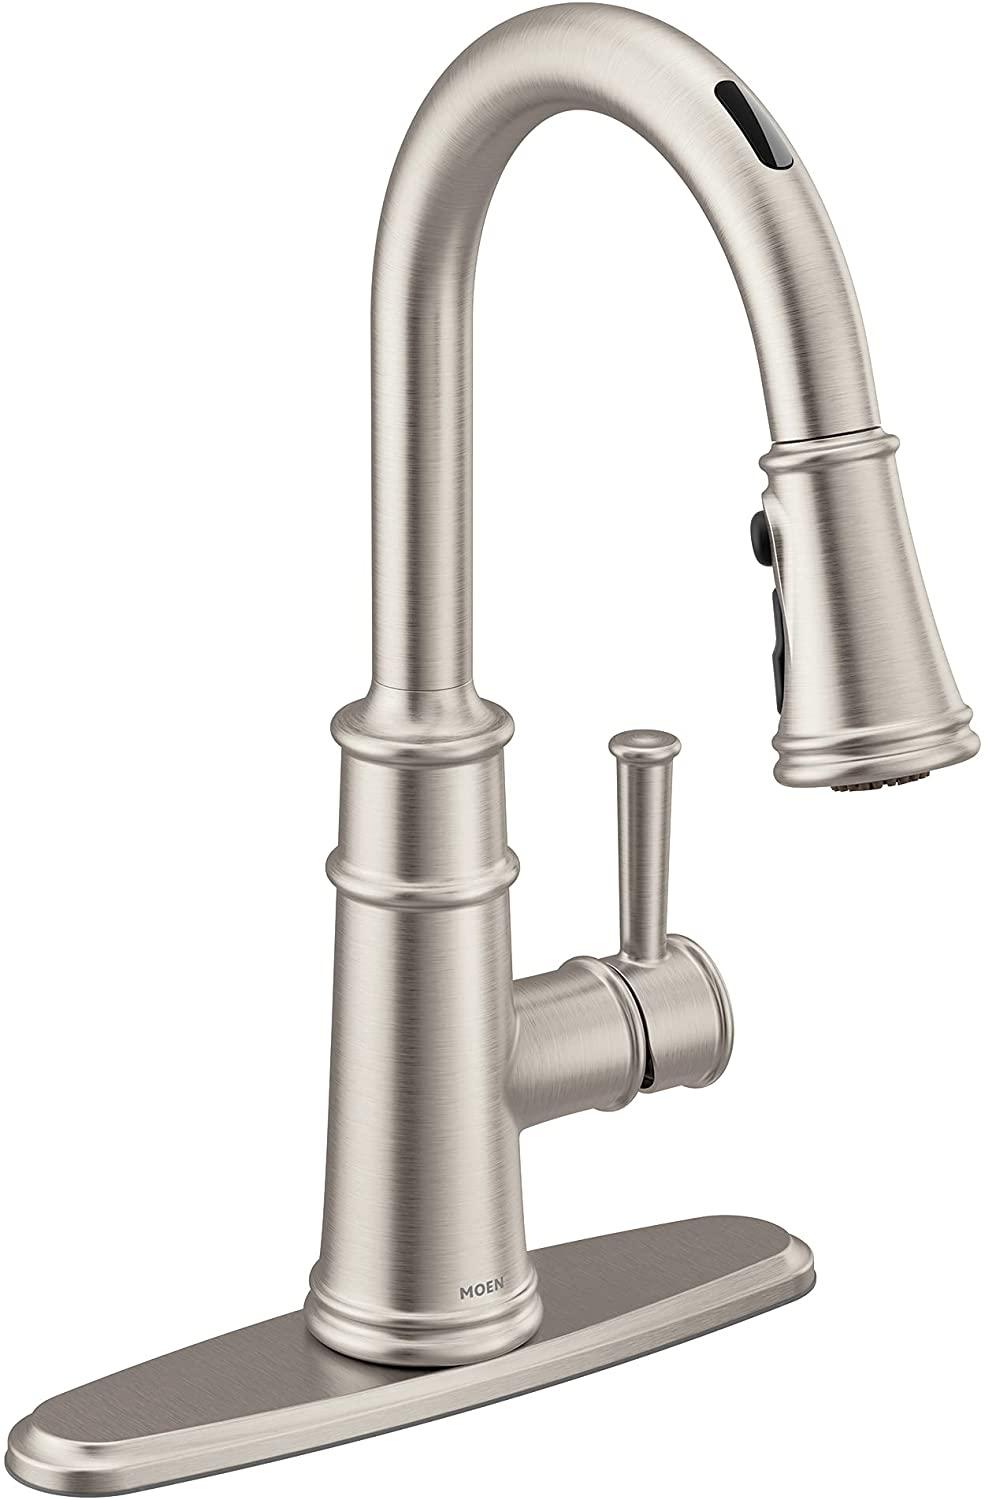 Moen's new touchless smart faucets are full of functionality 